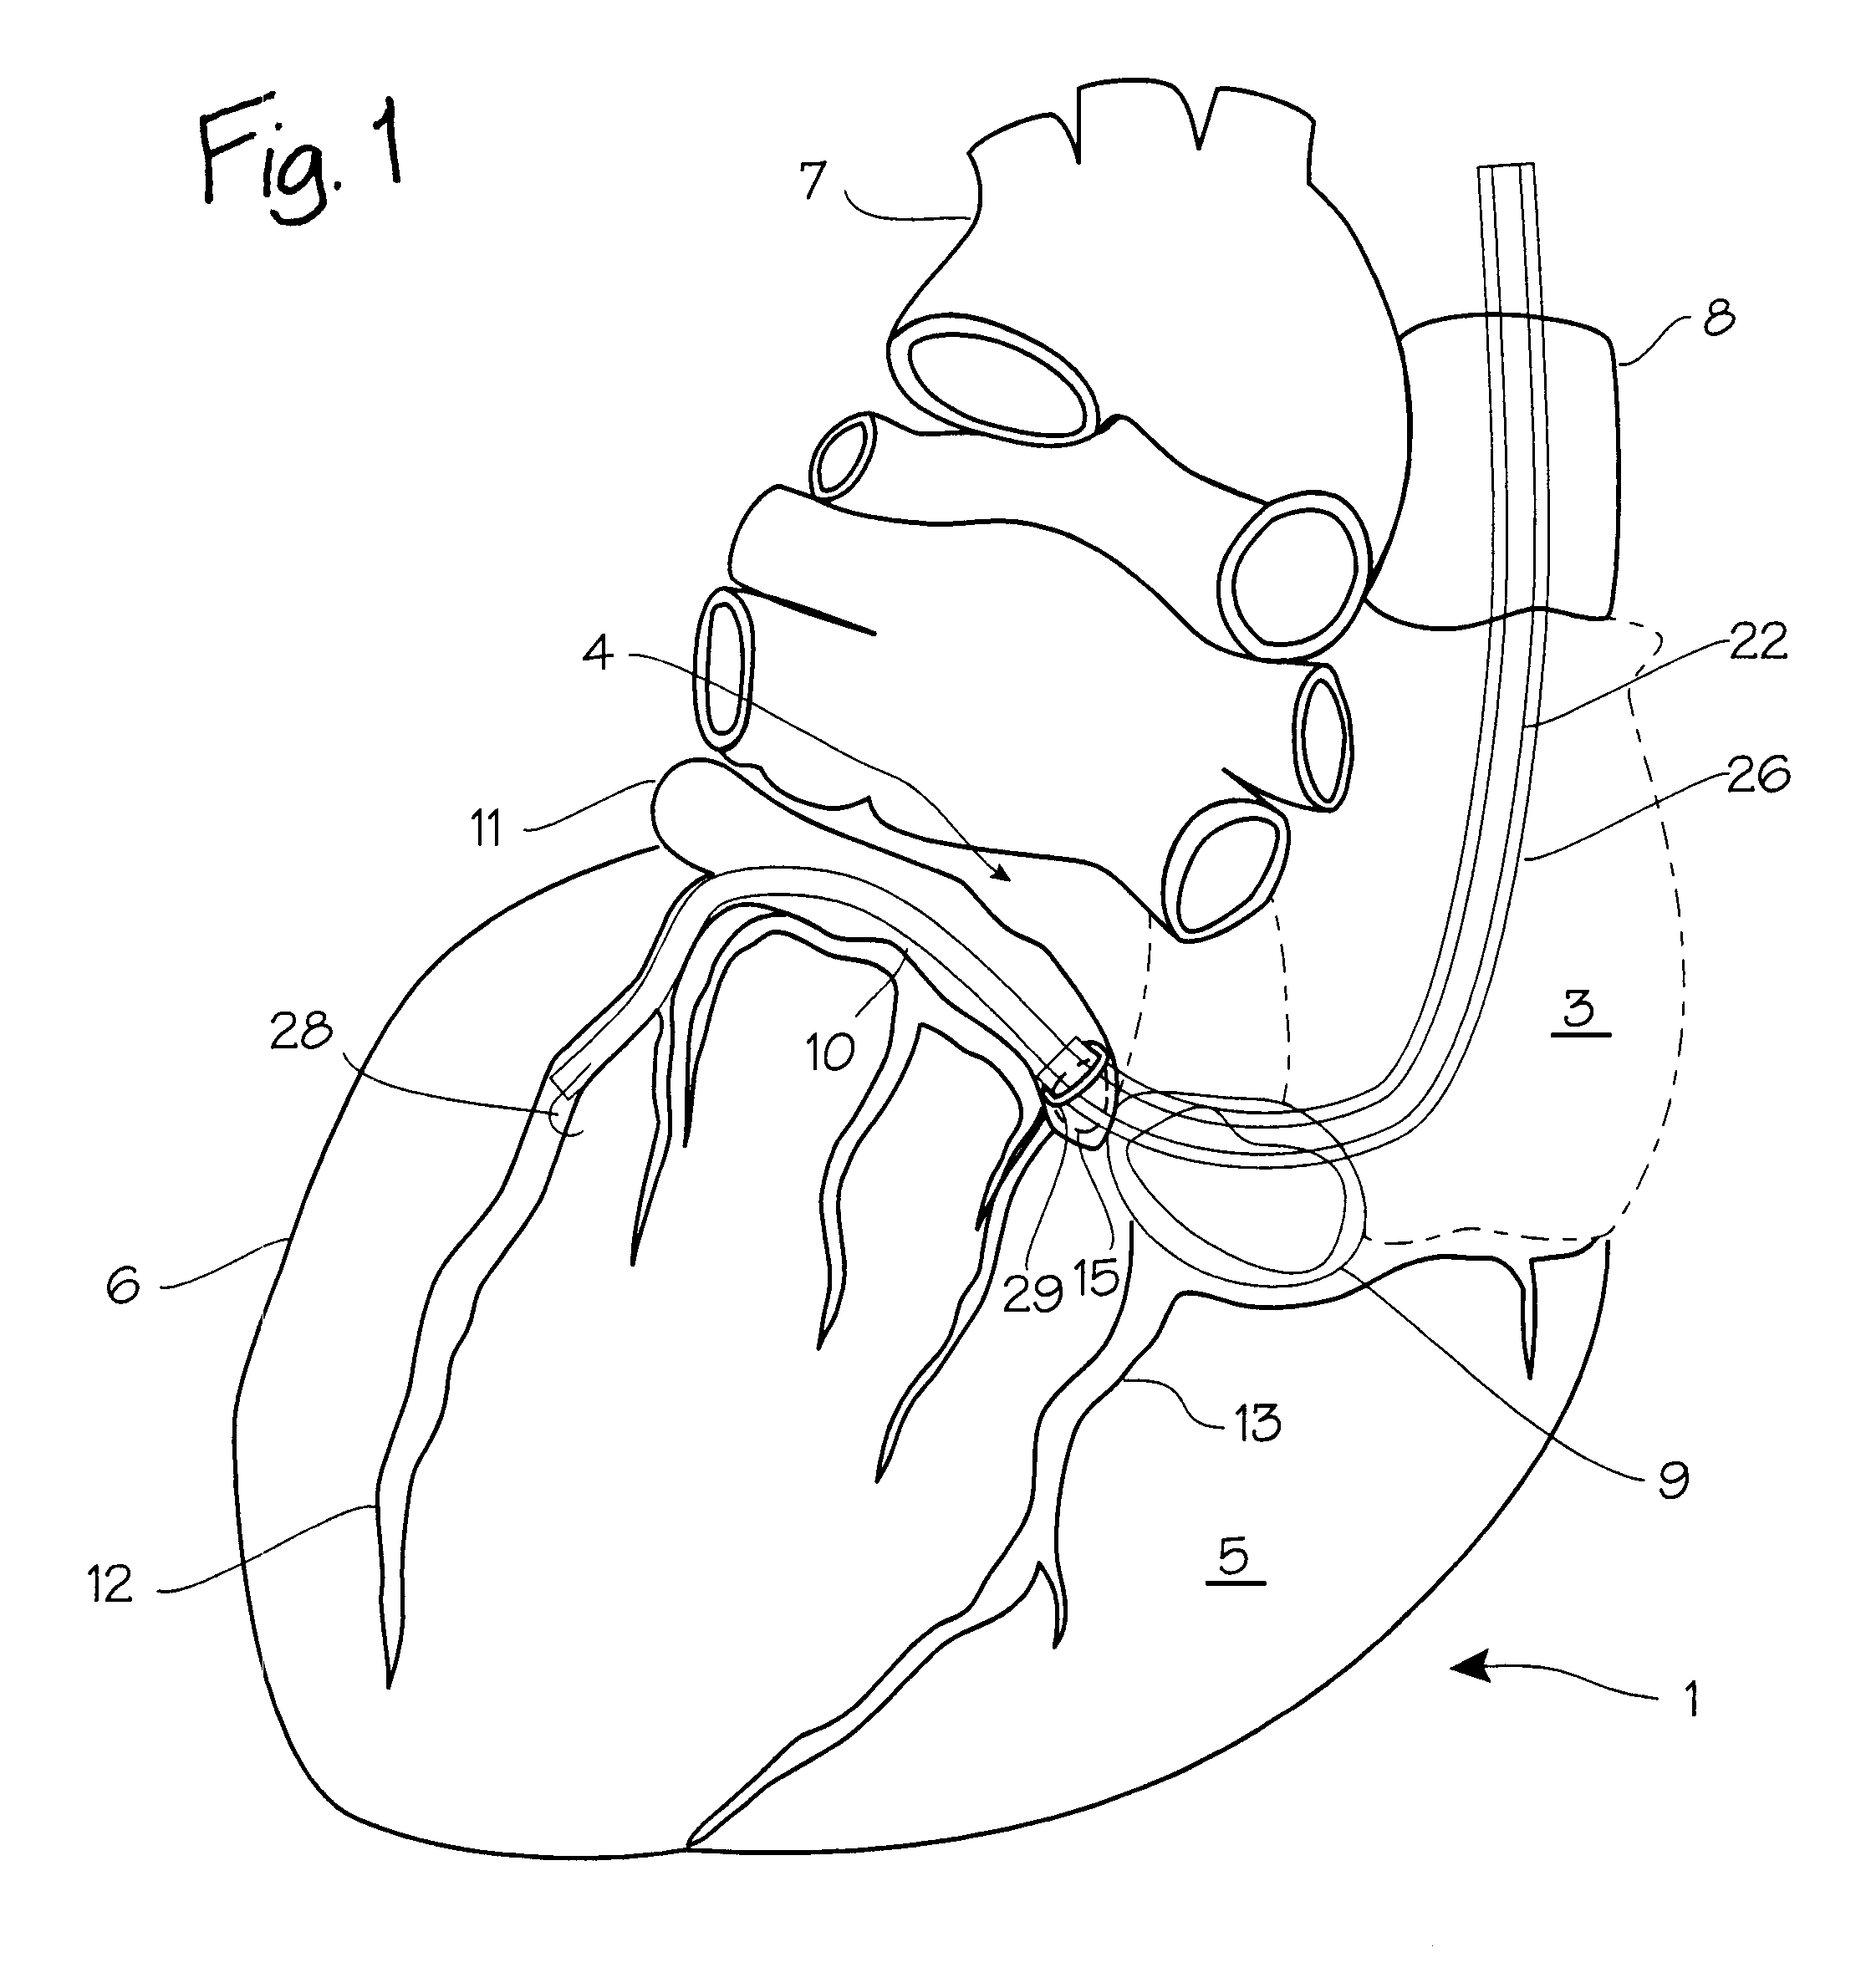 Method of treating the heart